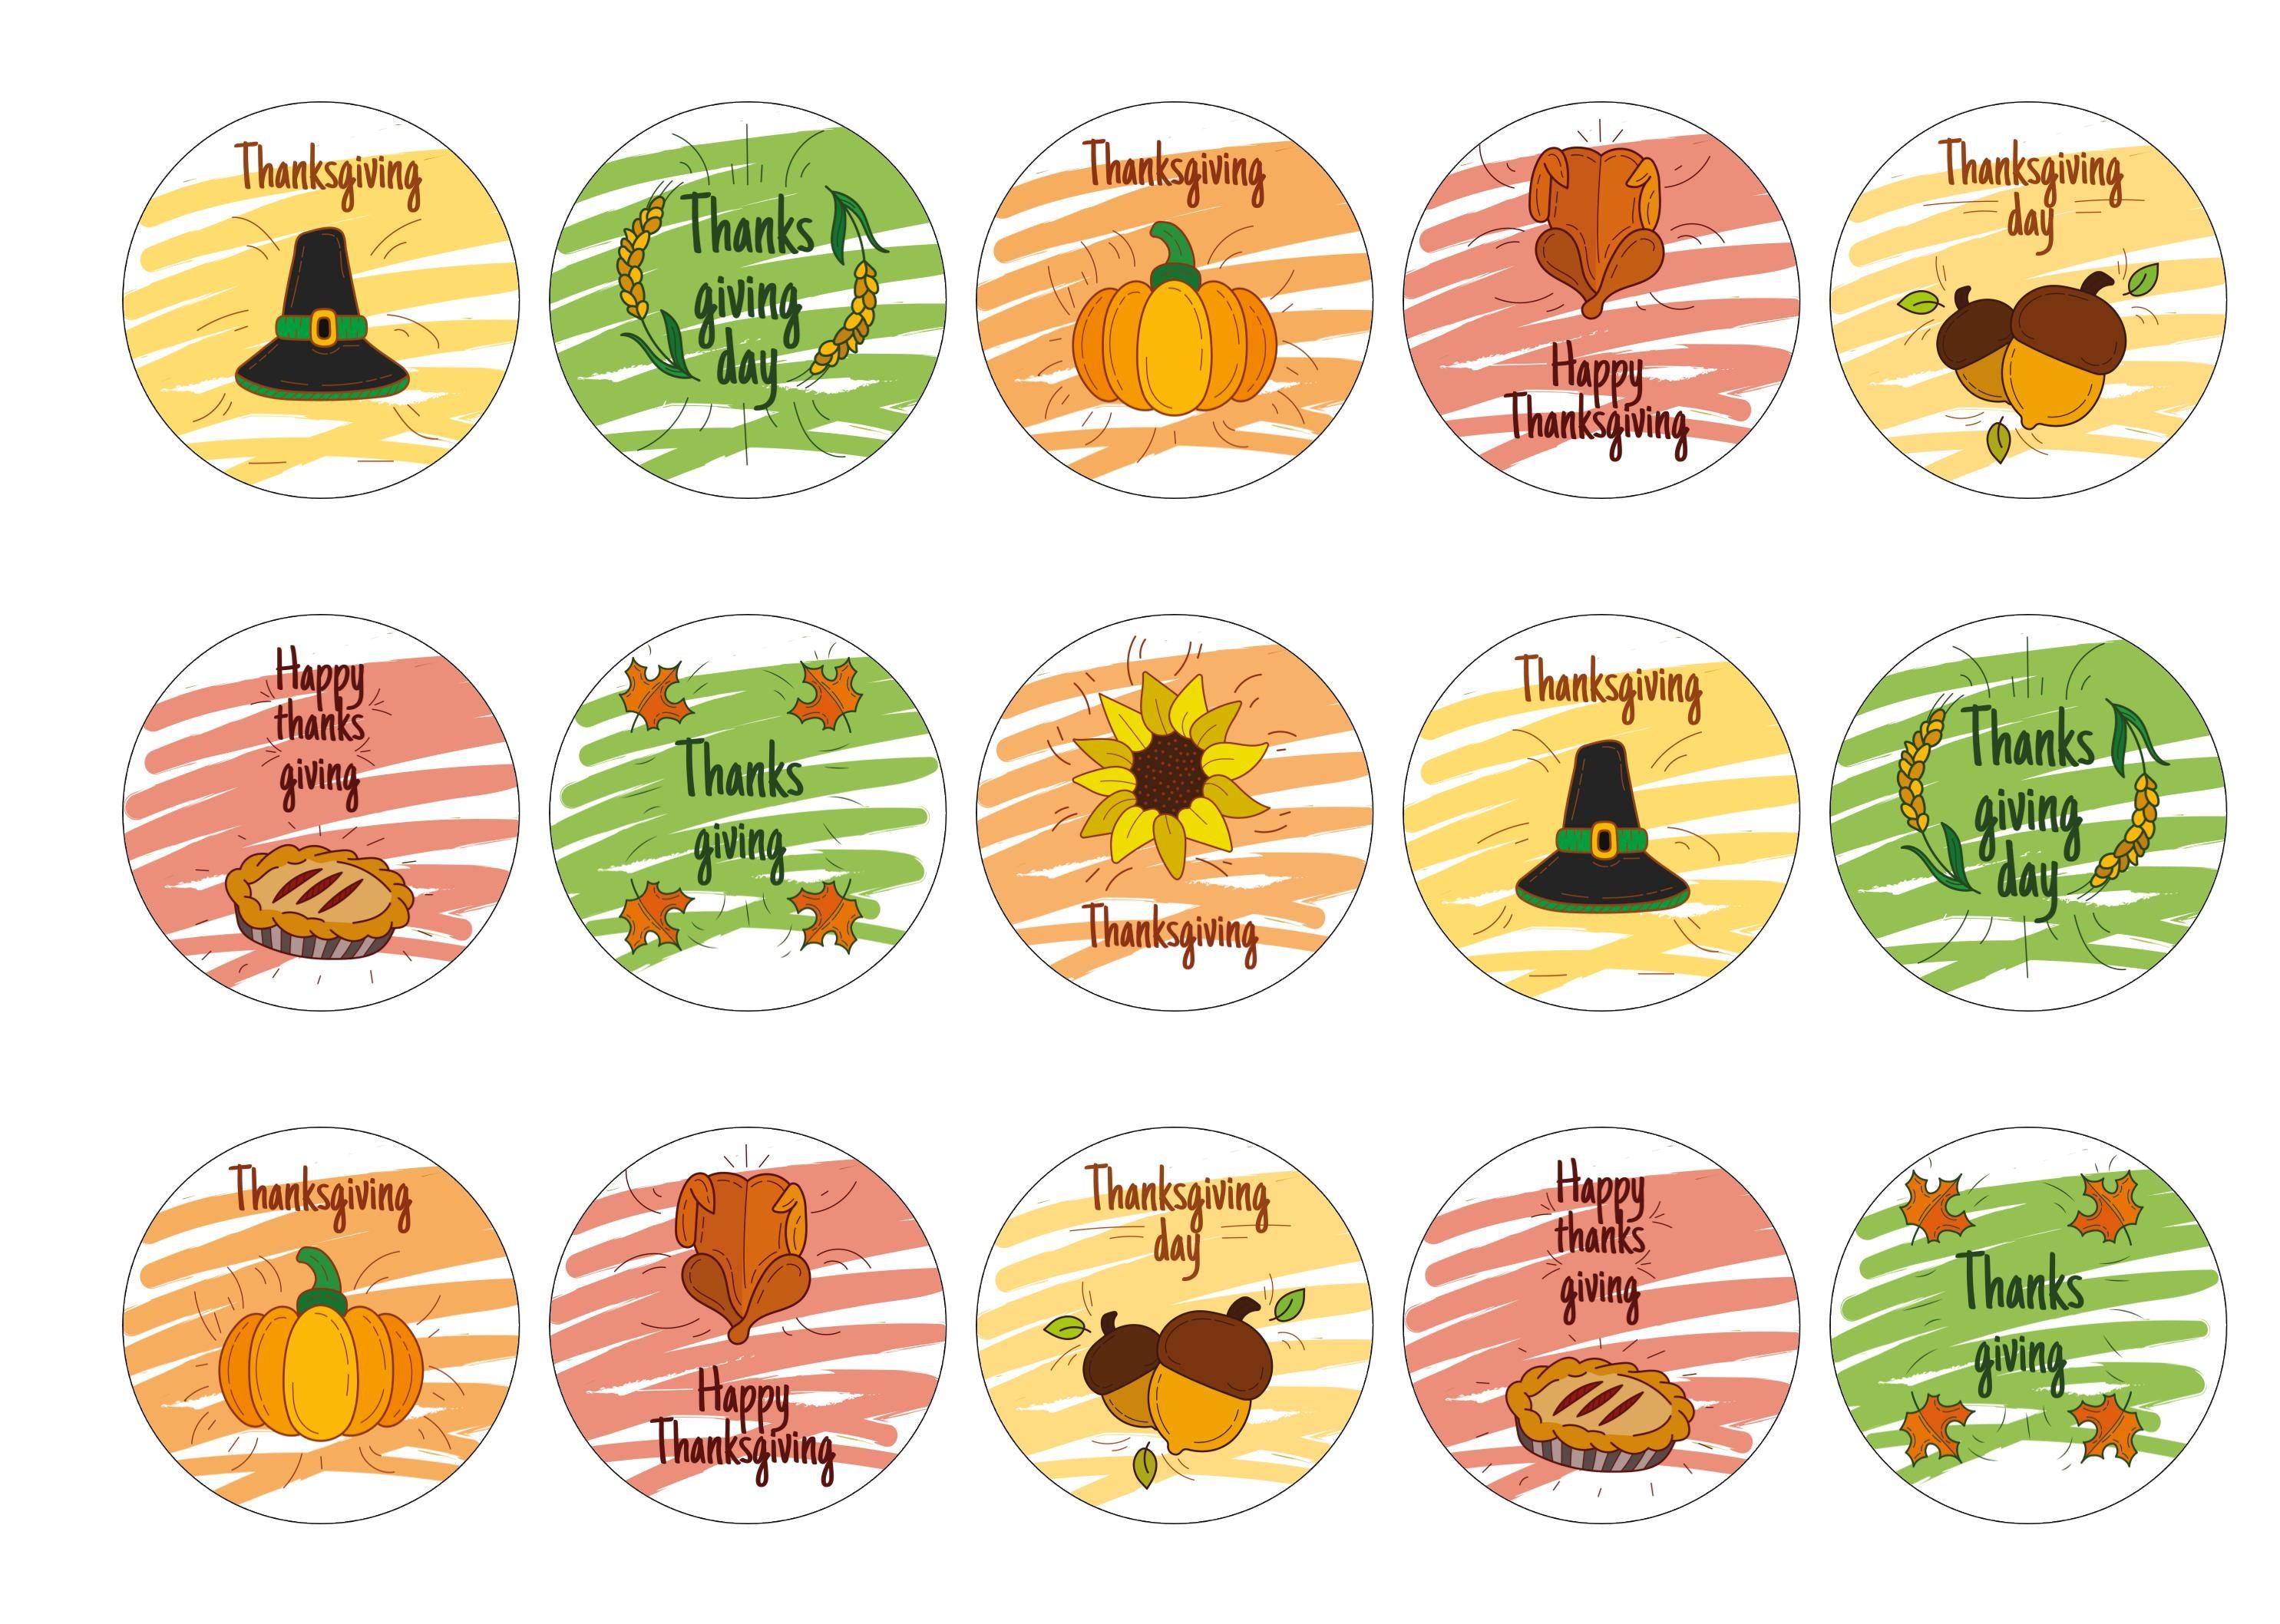 15 Thanksgiving cupcake toppers with images and messages to celebrate